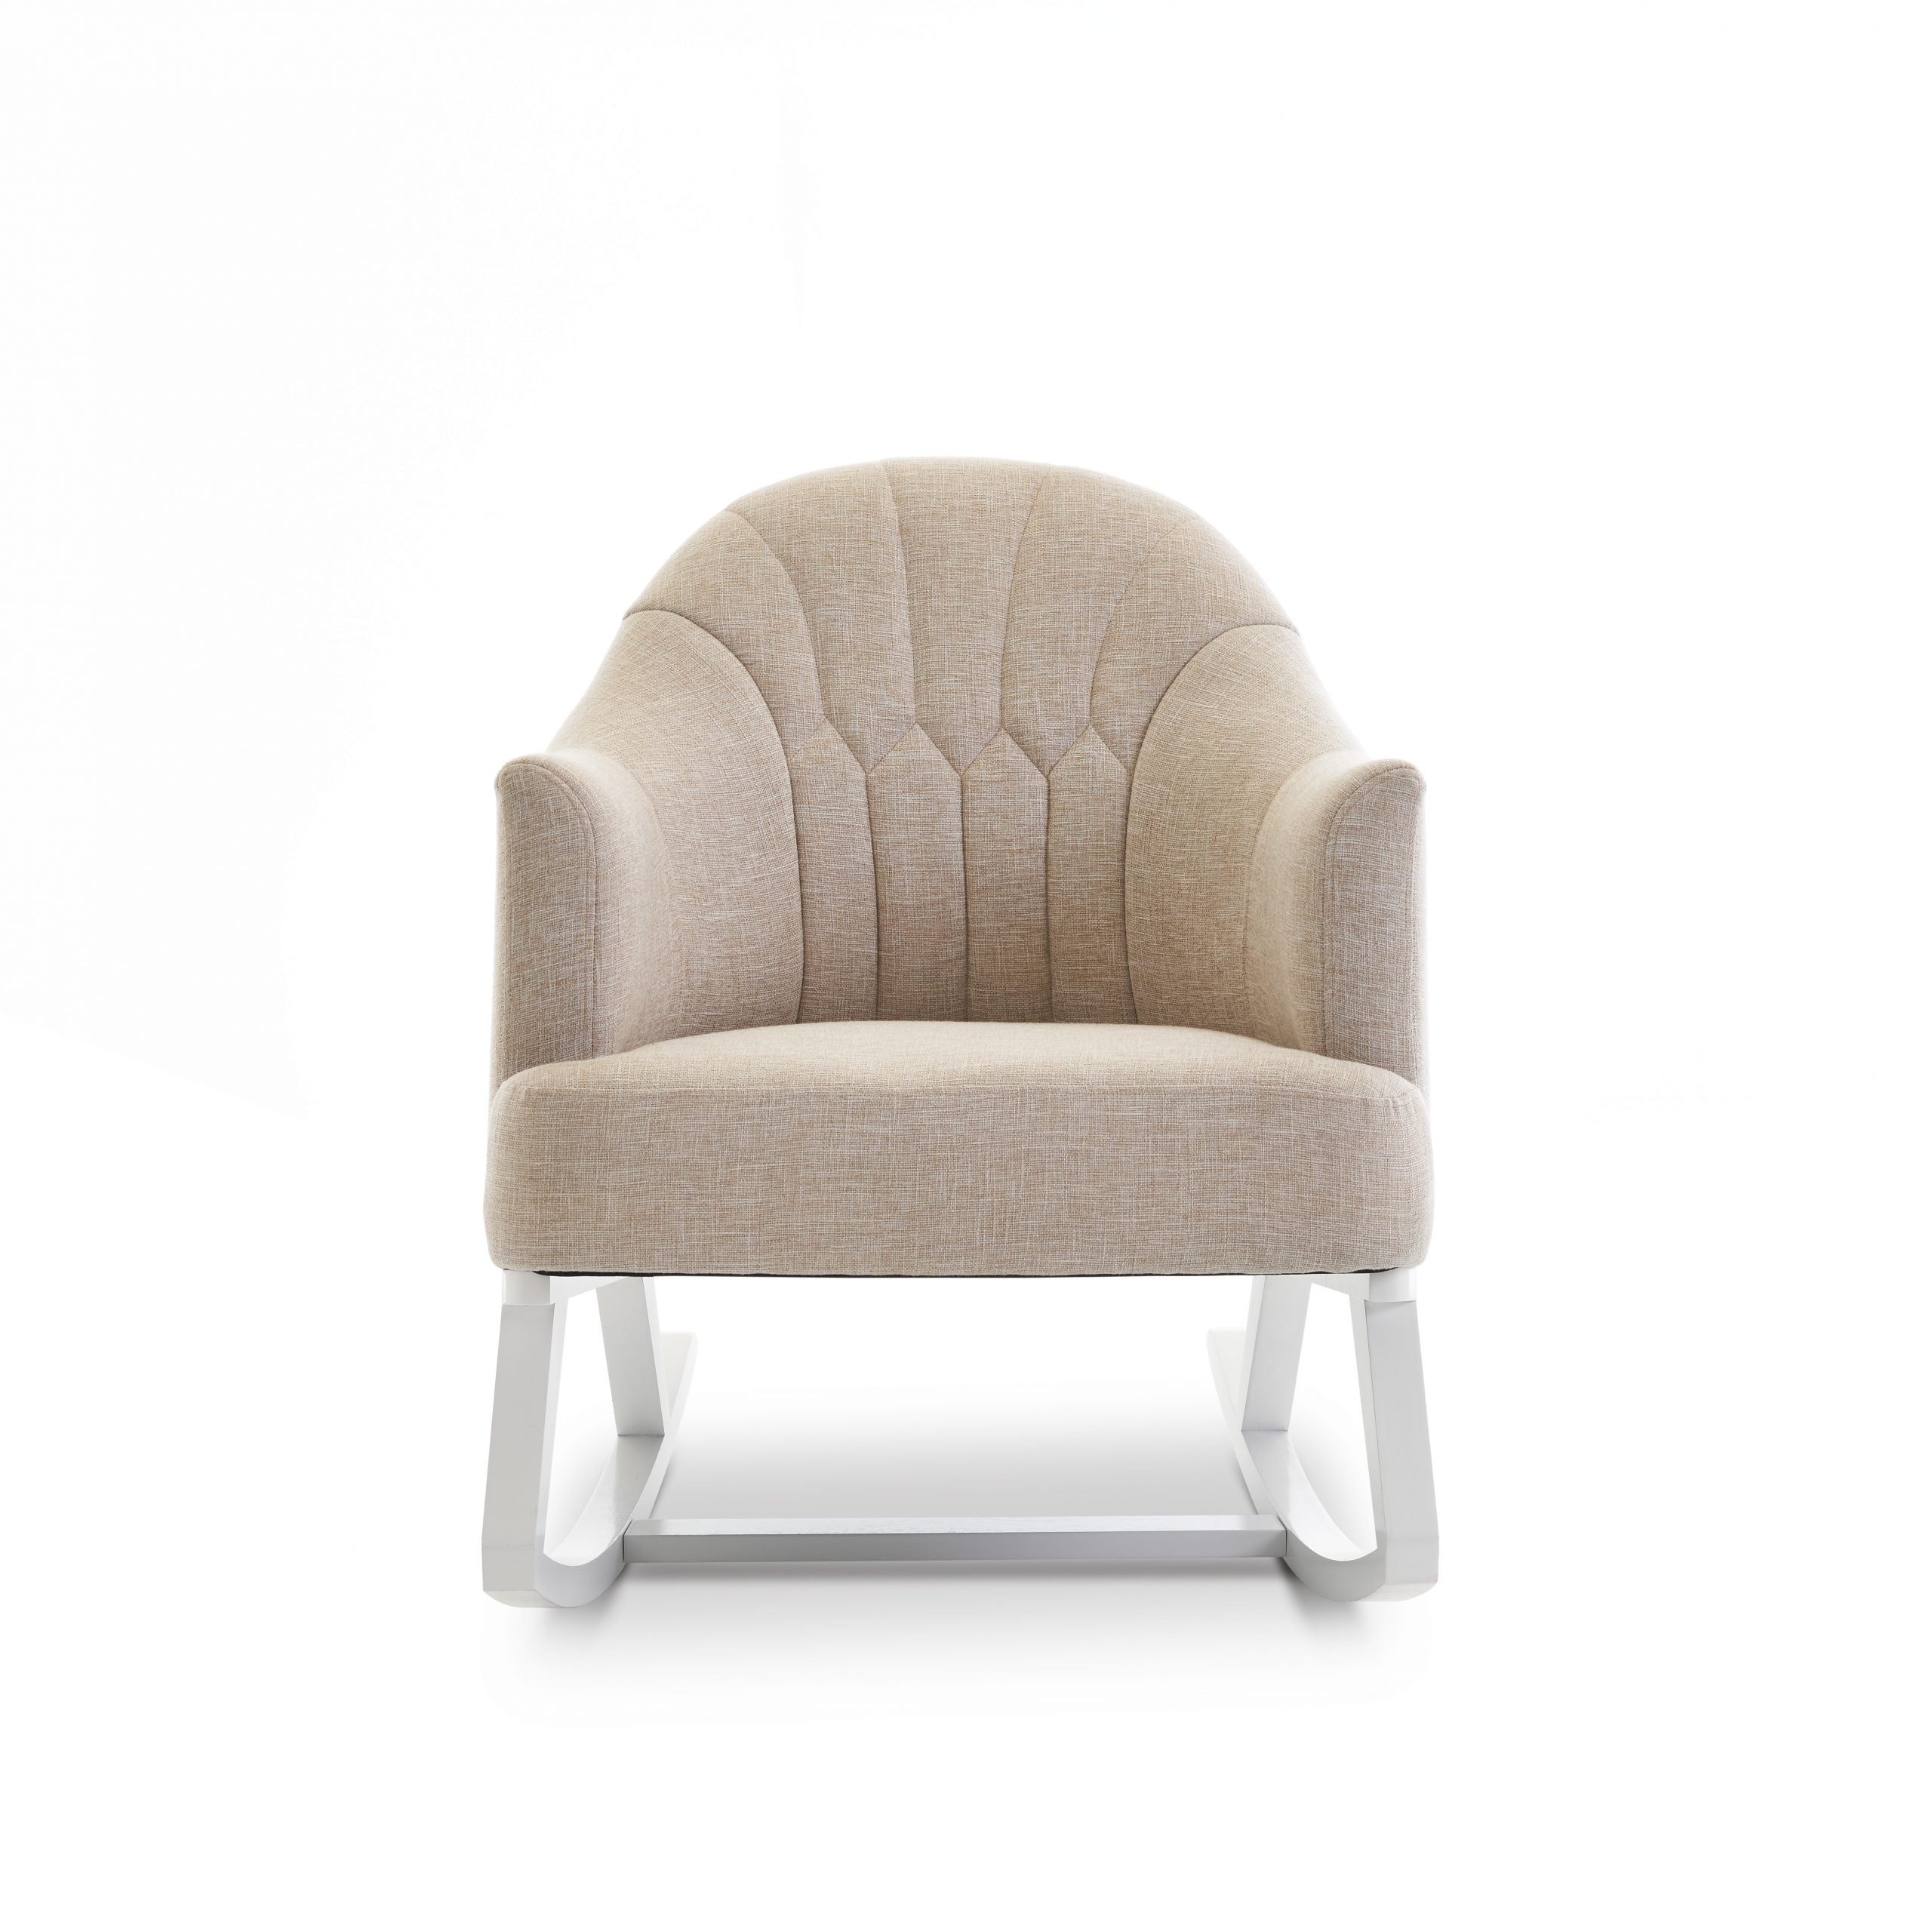 Obaby Round Back Rocking Chair - White with Oatmeal Cushion